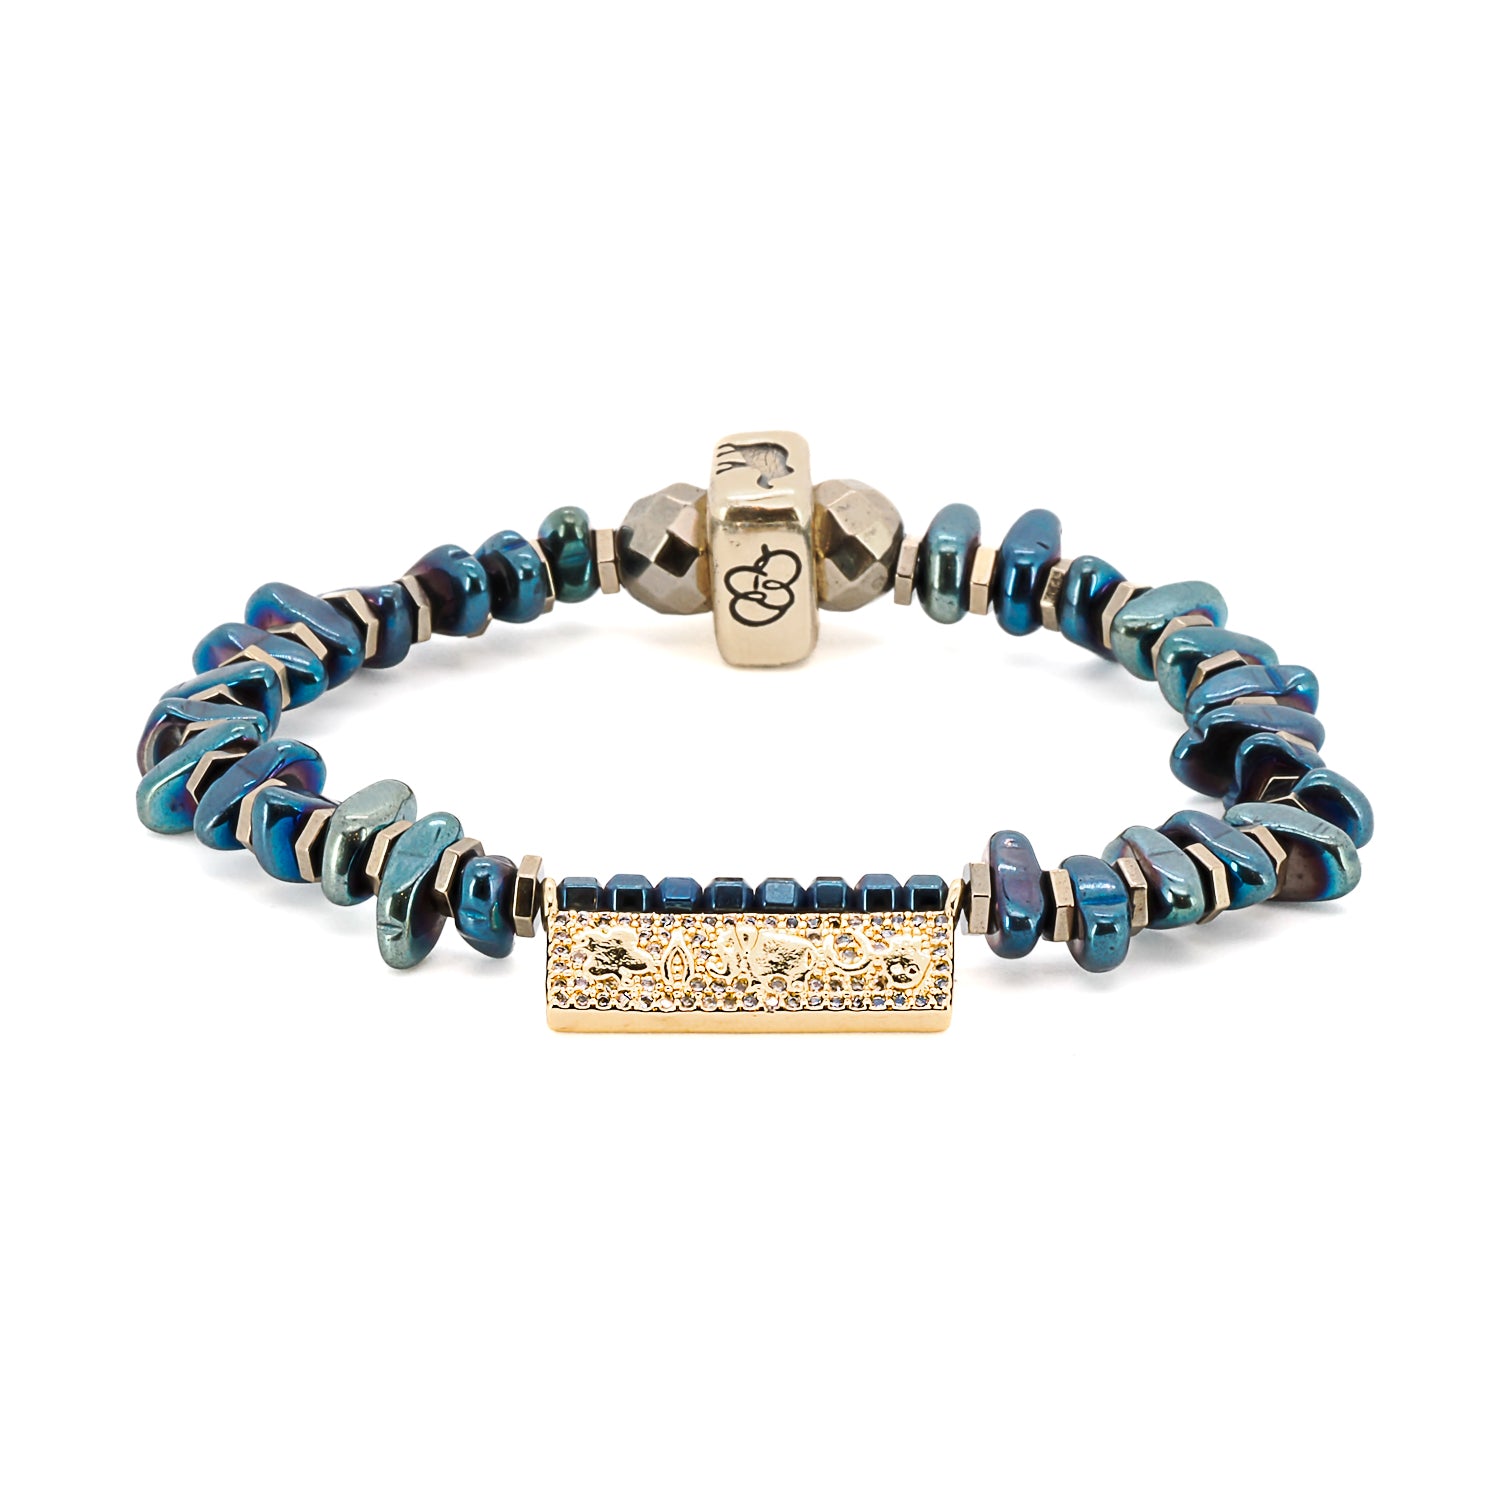 Experience the protective and luck-bringing properties of the Protection & Luck Blue Hematite Bracelet, a unique and meaningful accessory.